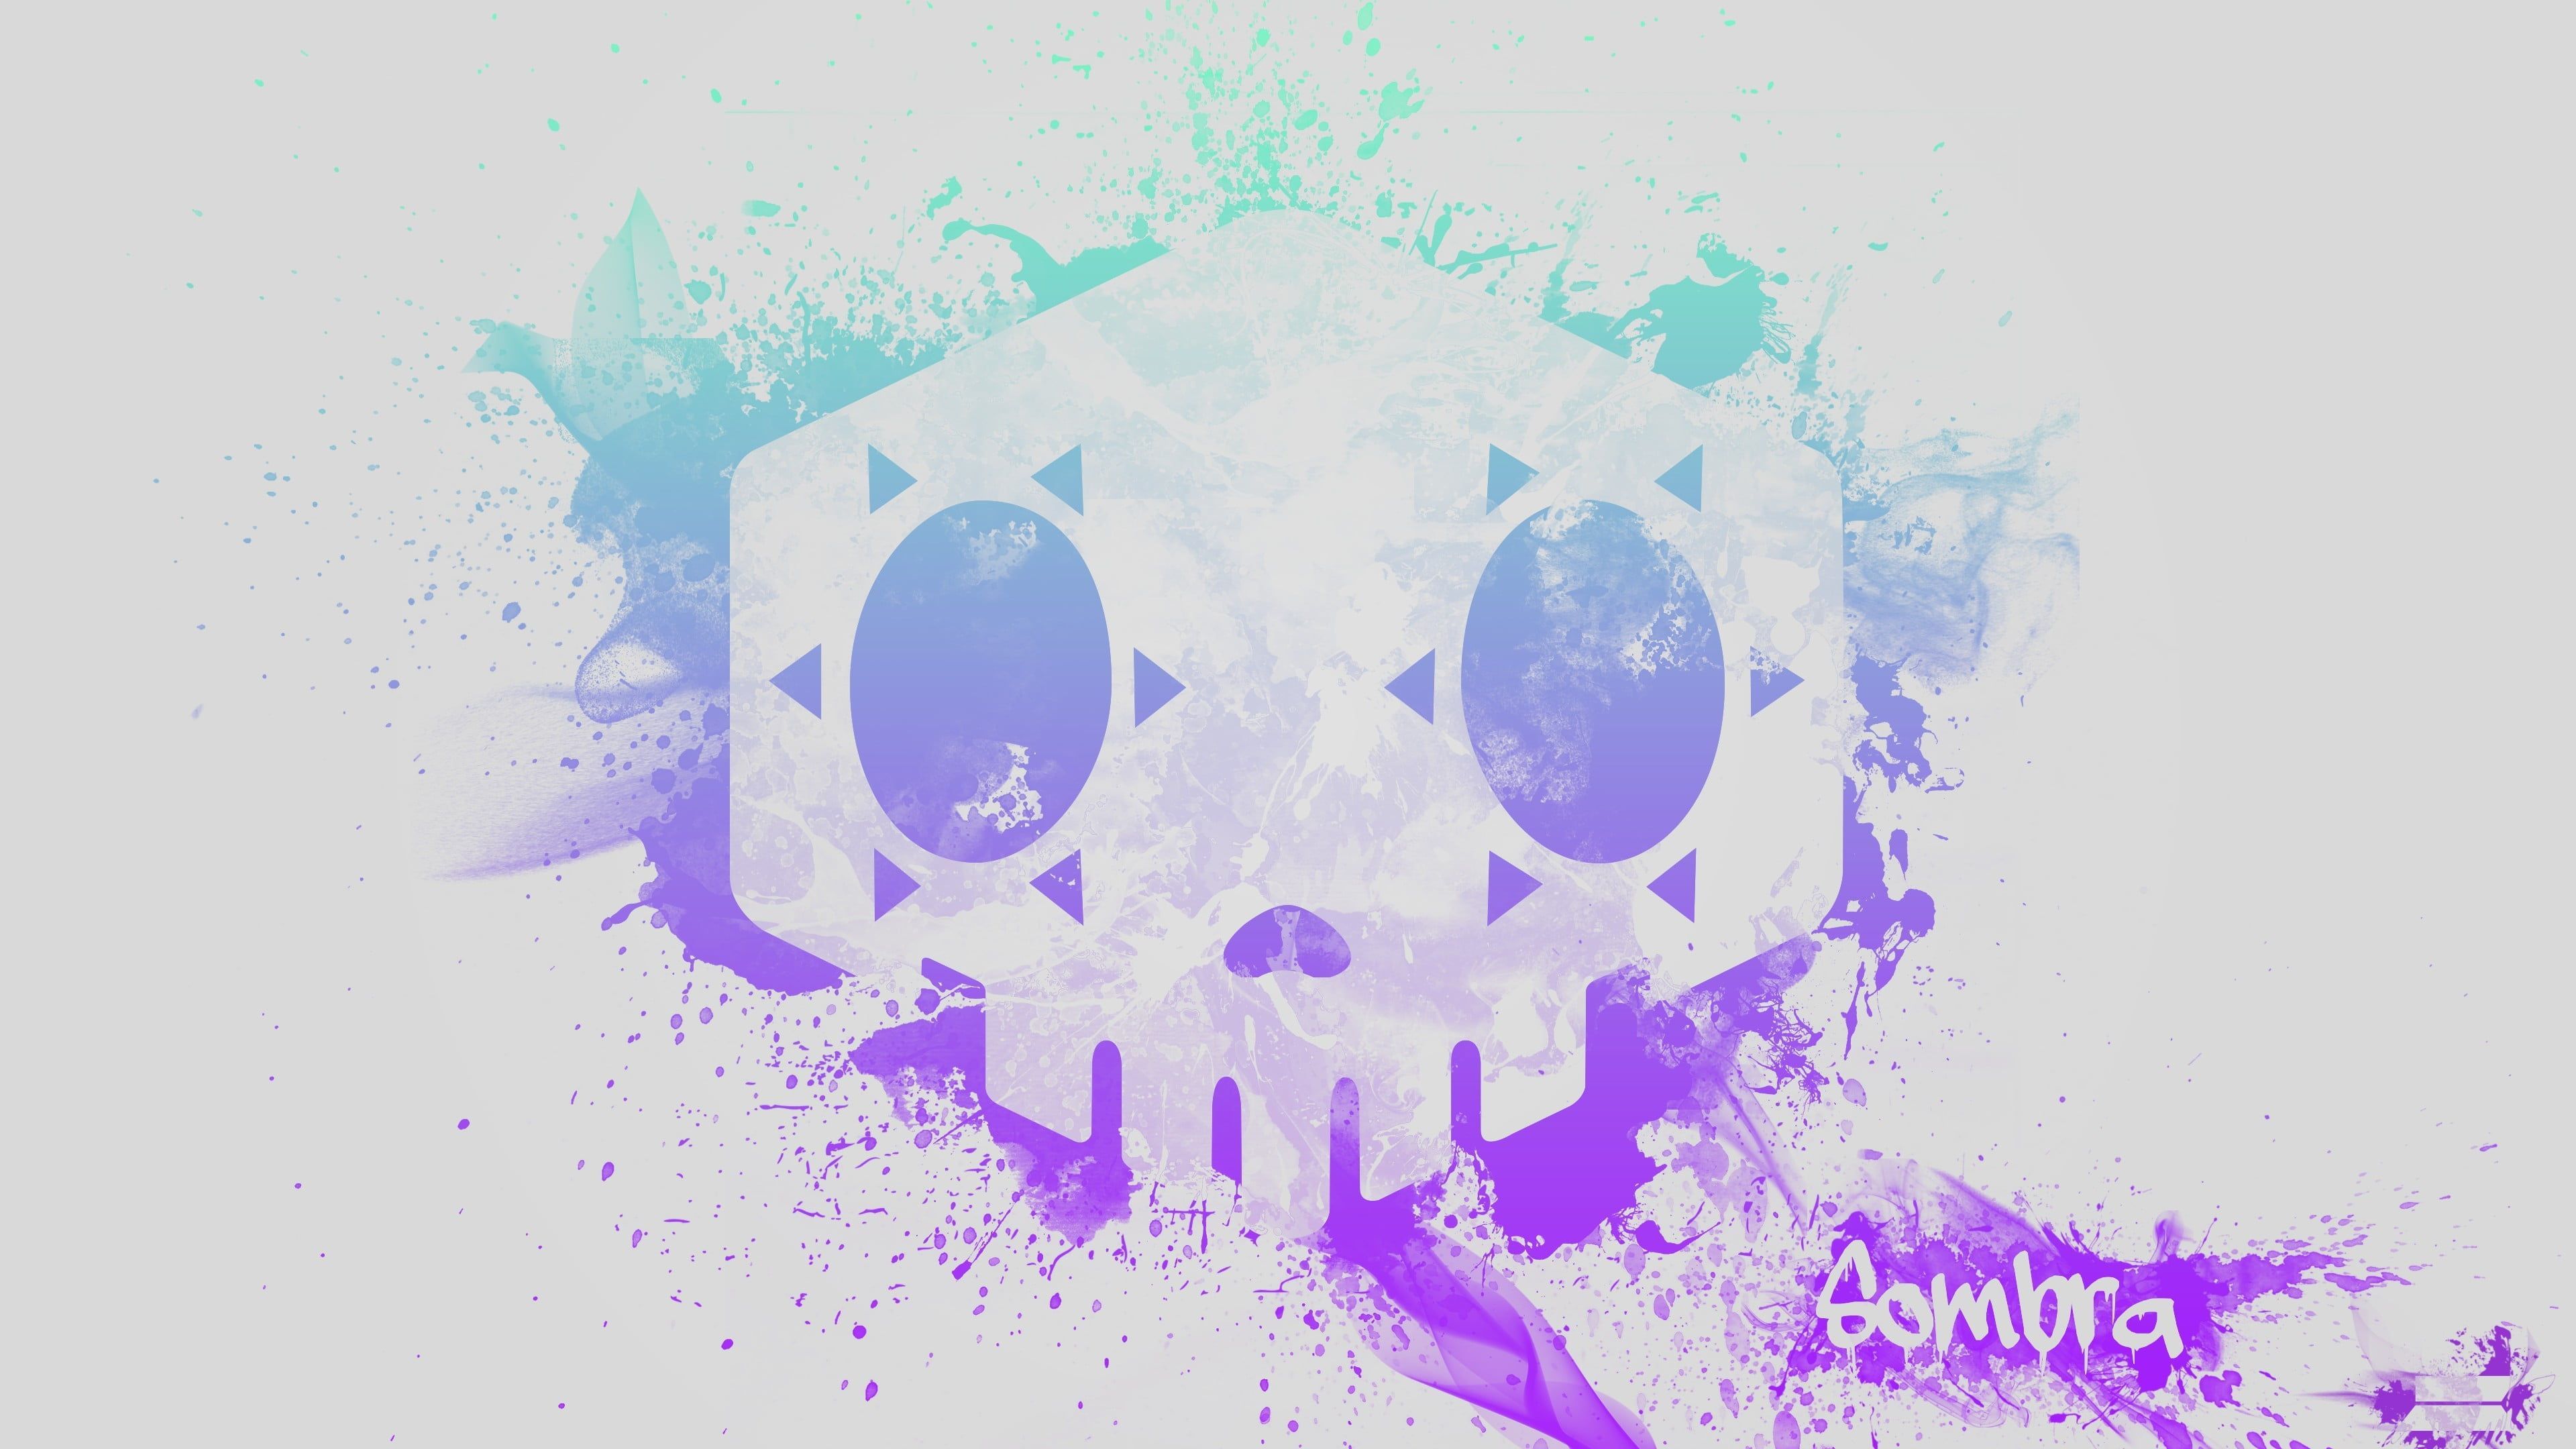 two white and purple heart shape decors video games Sombra (Overwatch) #Overwatch K #wallpaper #hdwa. Overwatch wallpaper, Sombra overwatch, Overwatch drawings